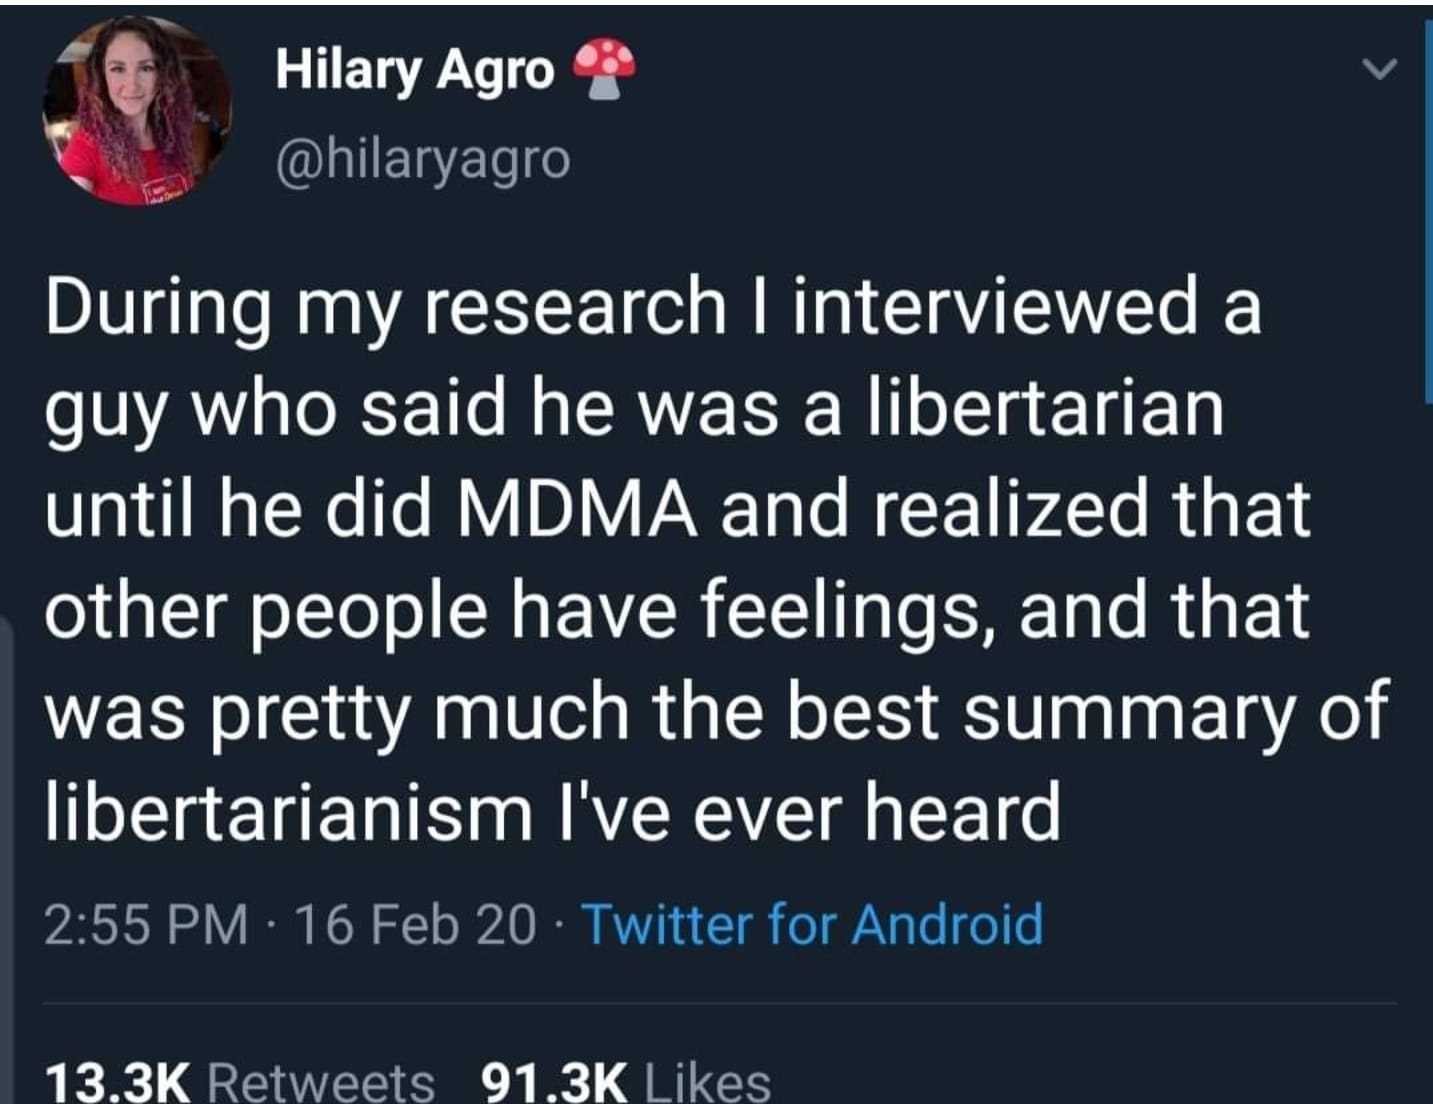 during my research i interviewed a guy who said he was a libertarian until he did mdma and realized that other people have feelings, and that was pretty much the best summary of libertarianism i've ever heard